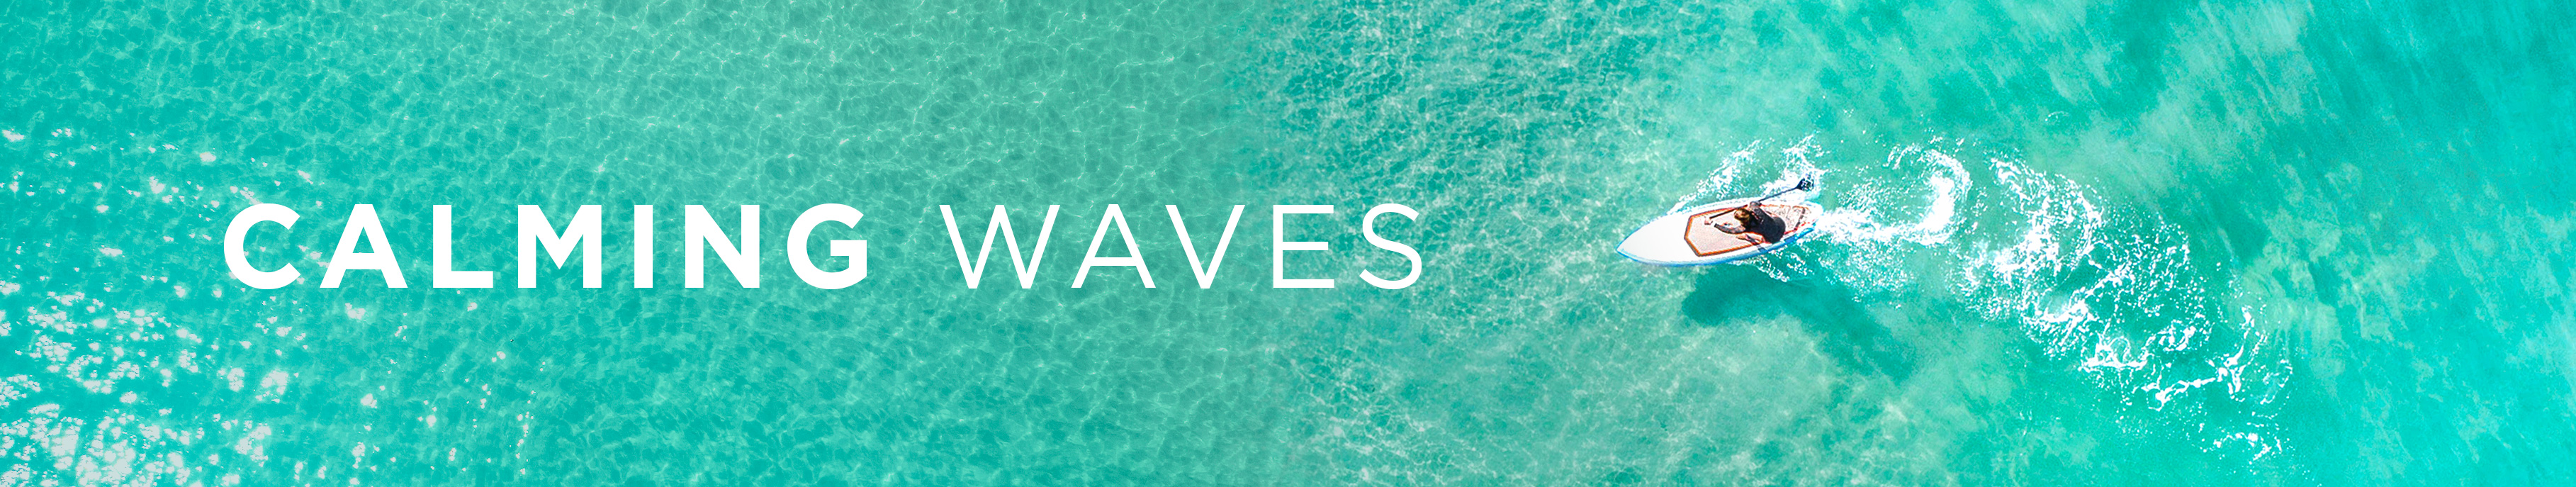 Calming Waves Page Banner